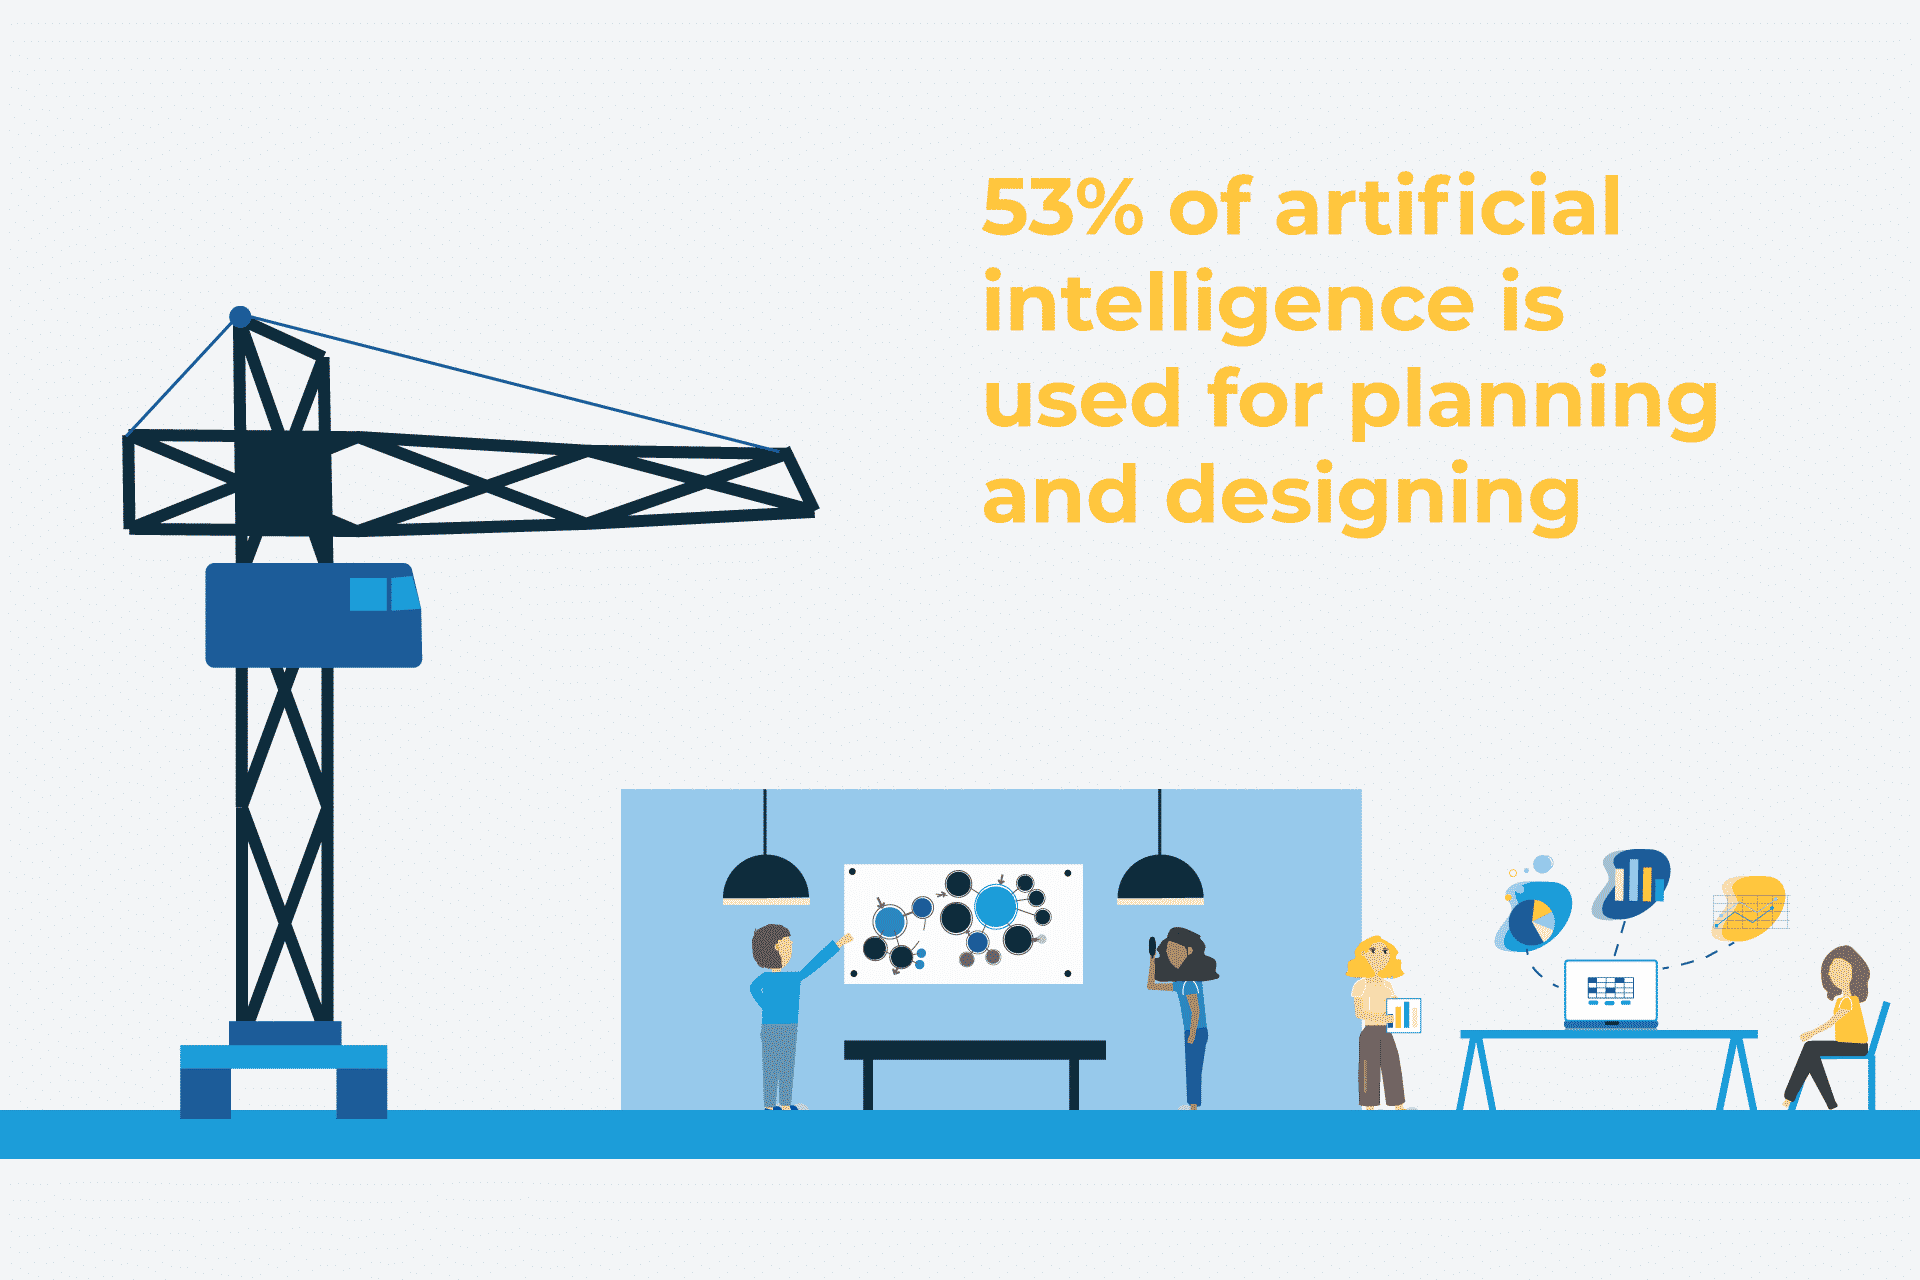 53% of artificial intelligence is used for planning and designing